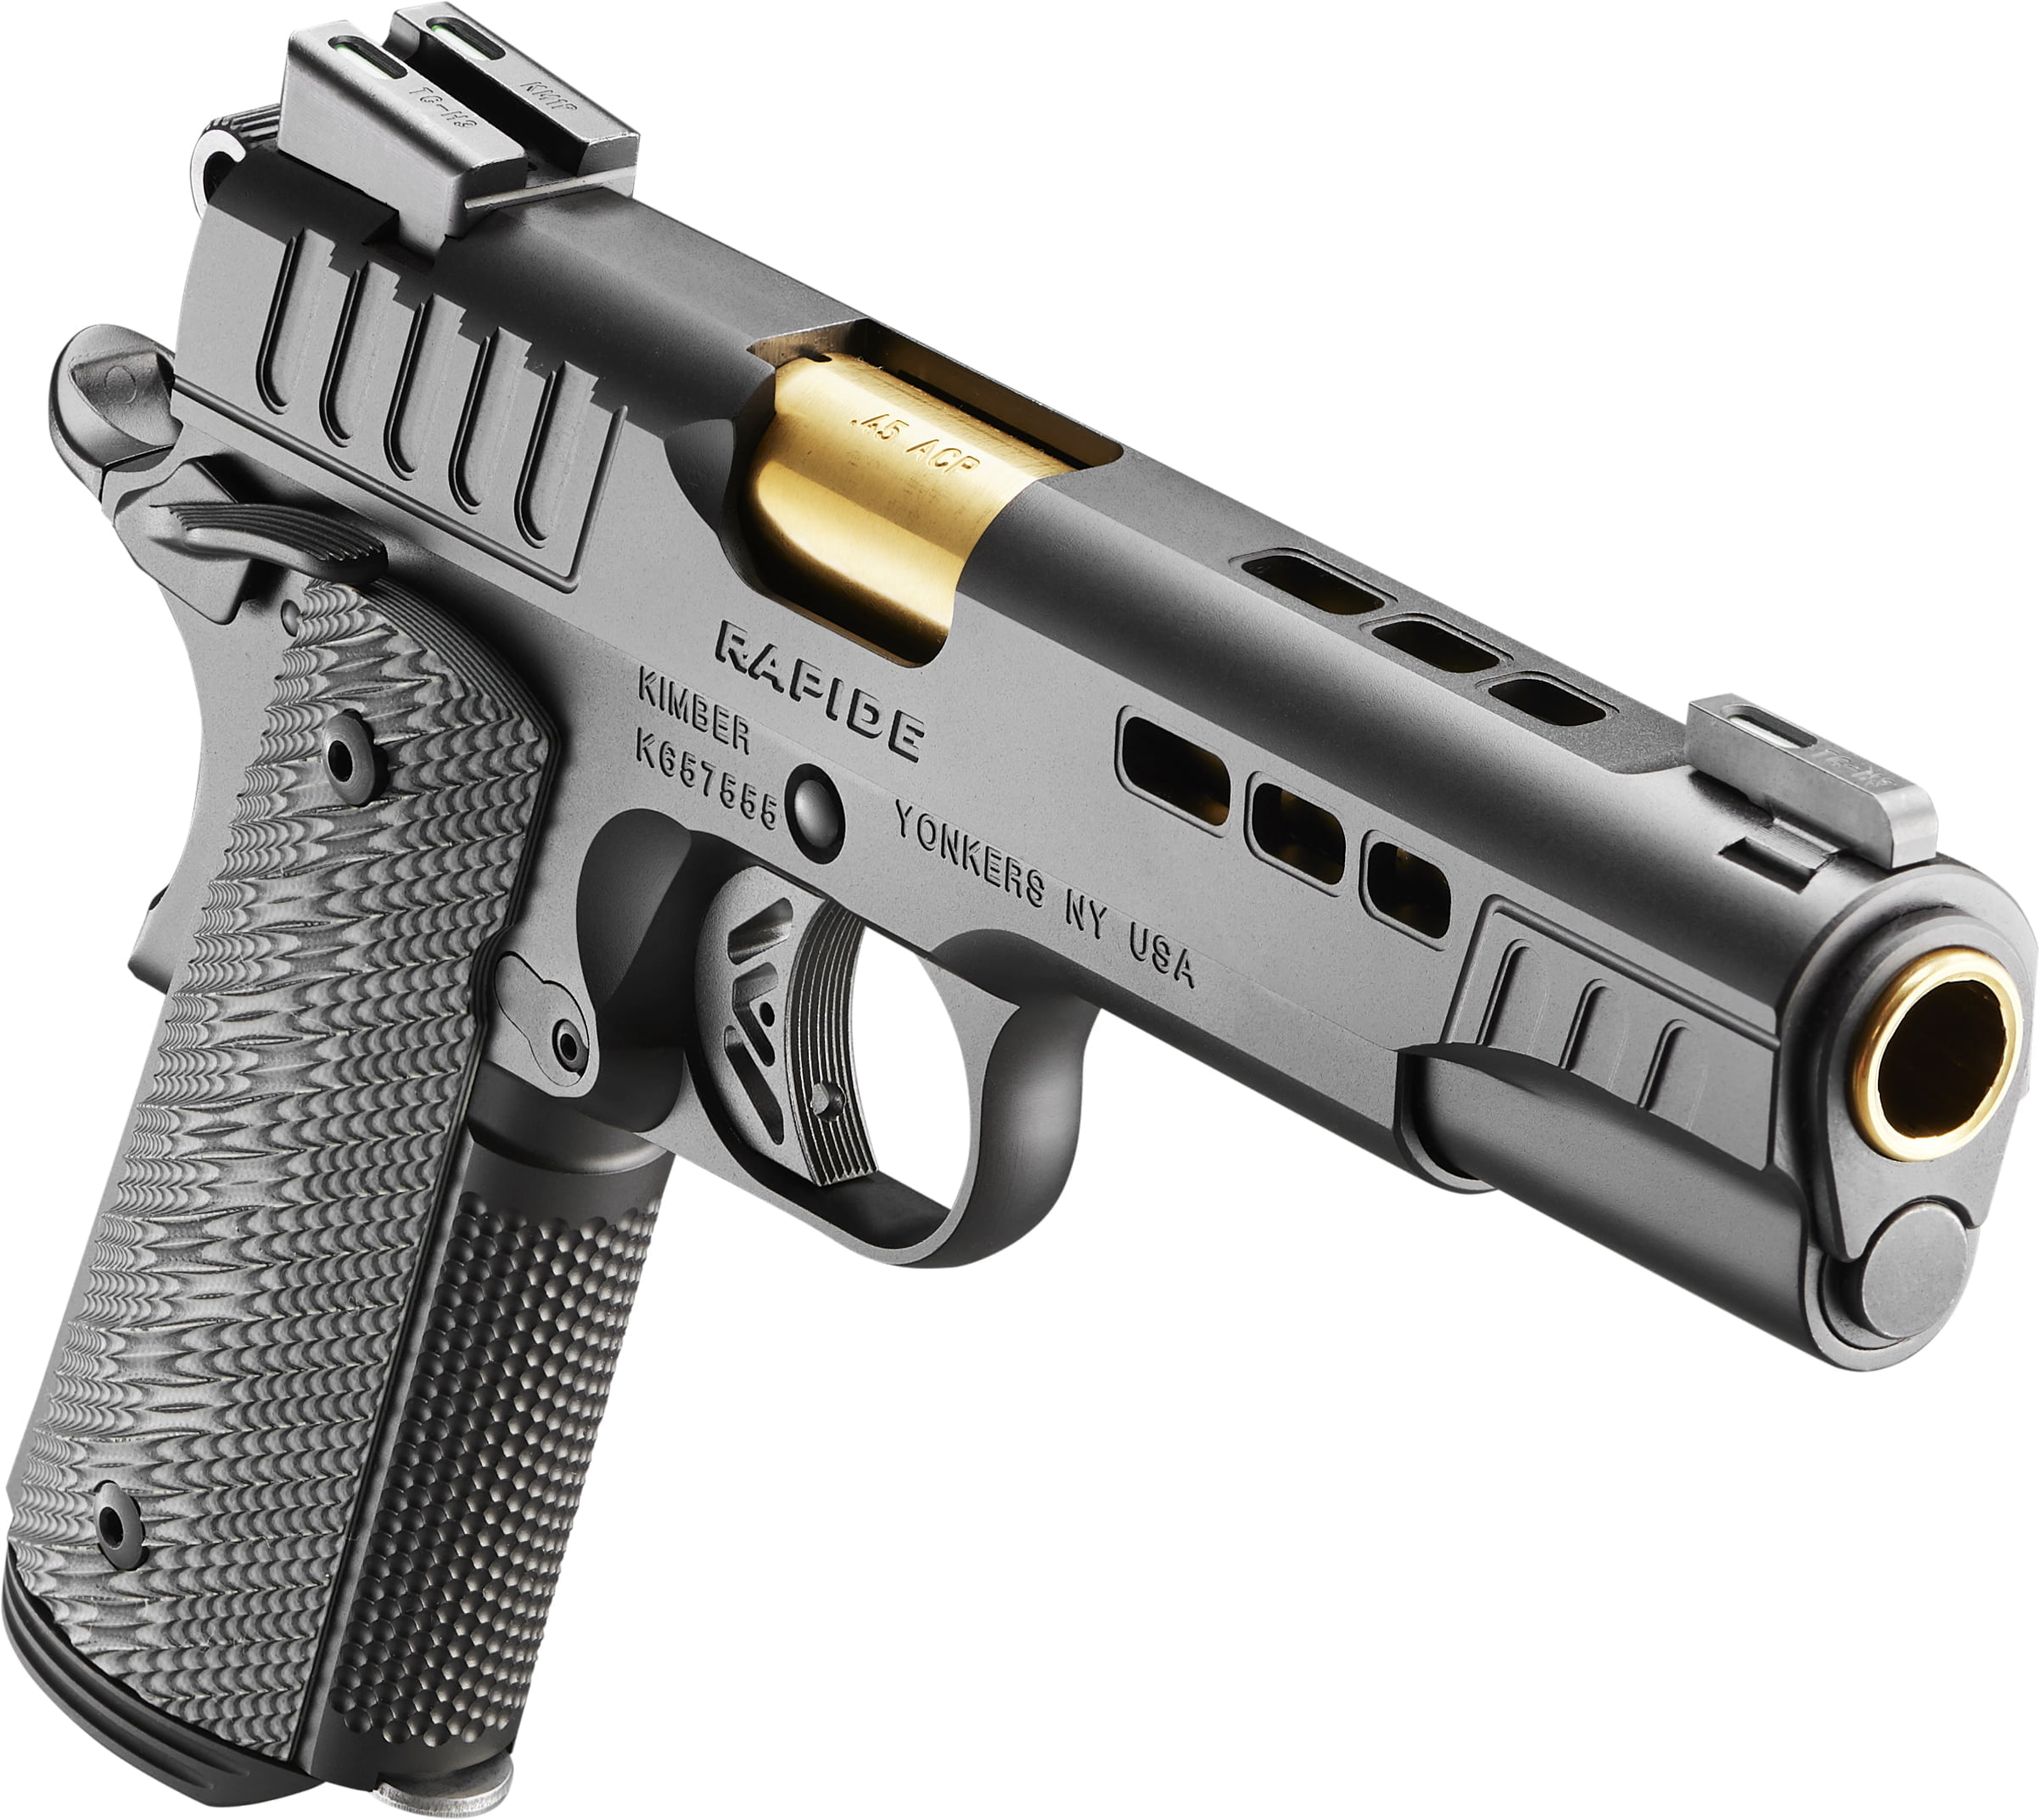 Kimber Rapide a Go fast gun for the Fast & Furious crowd.